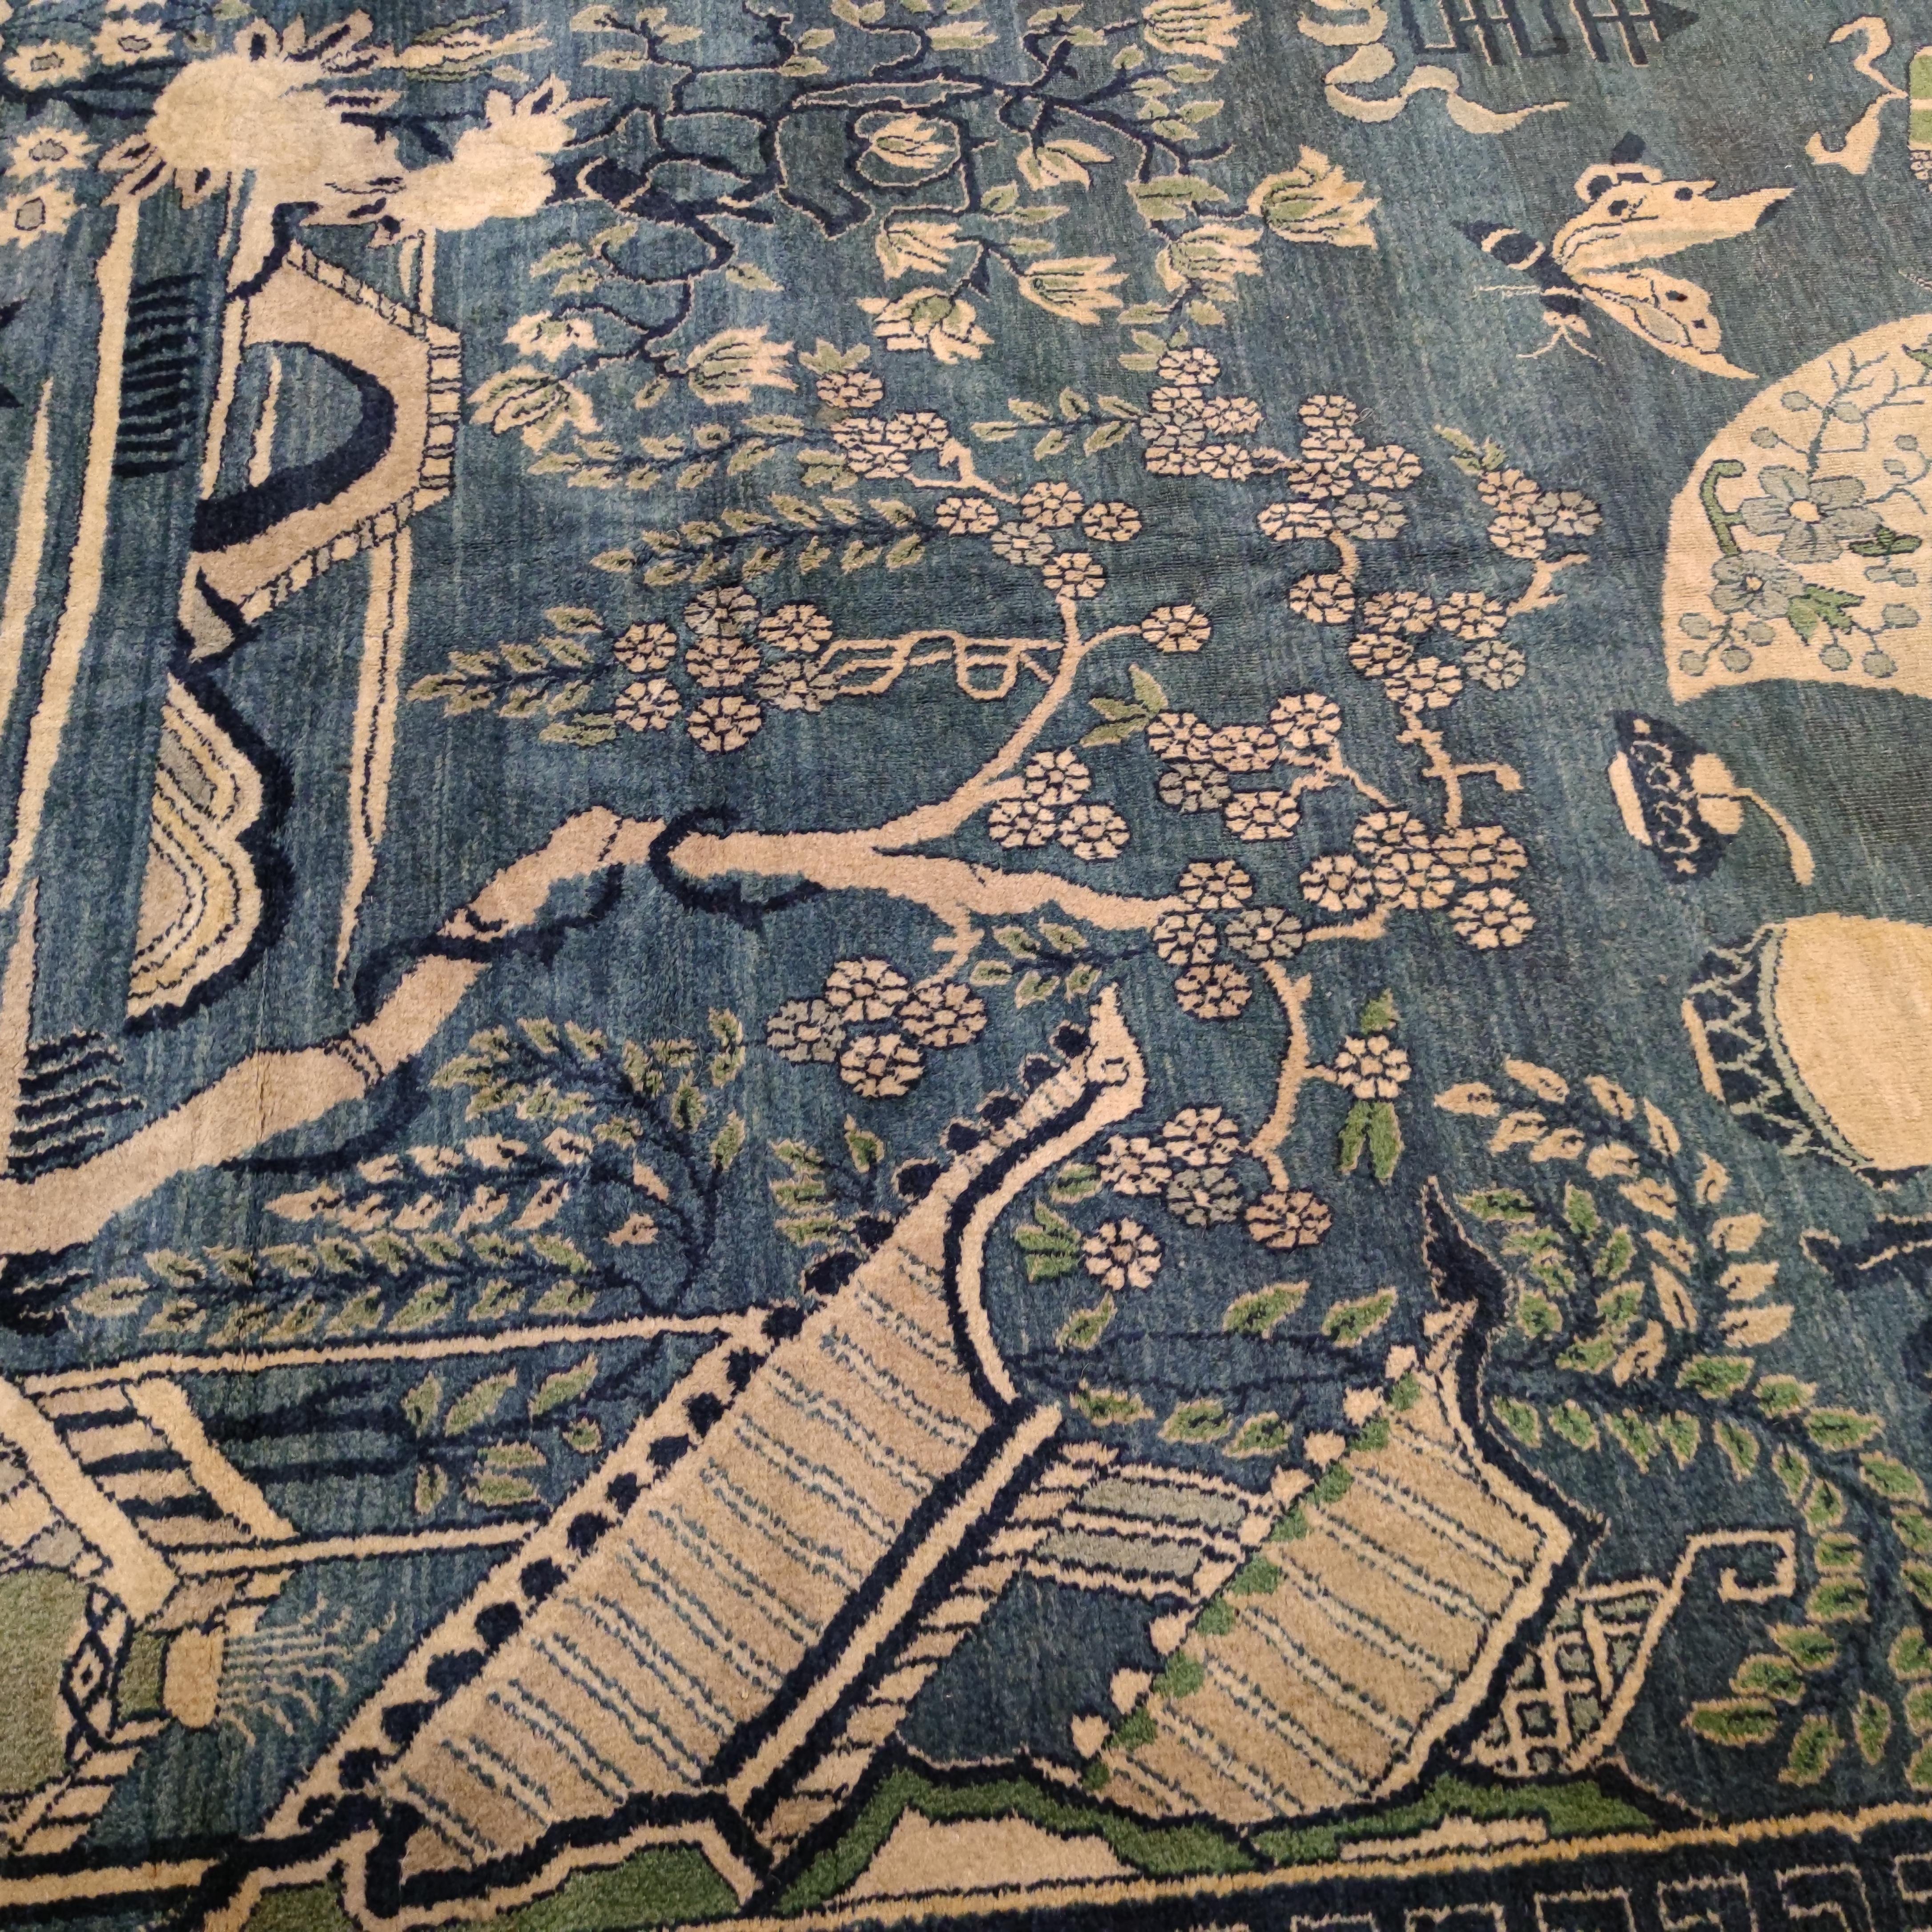 Indian Spectacular Antique Sky Blue Indochine Rug with Cranes and Longevity Symbols For Sale